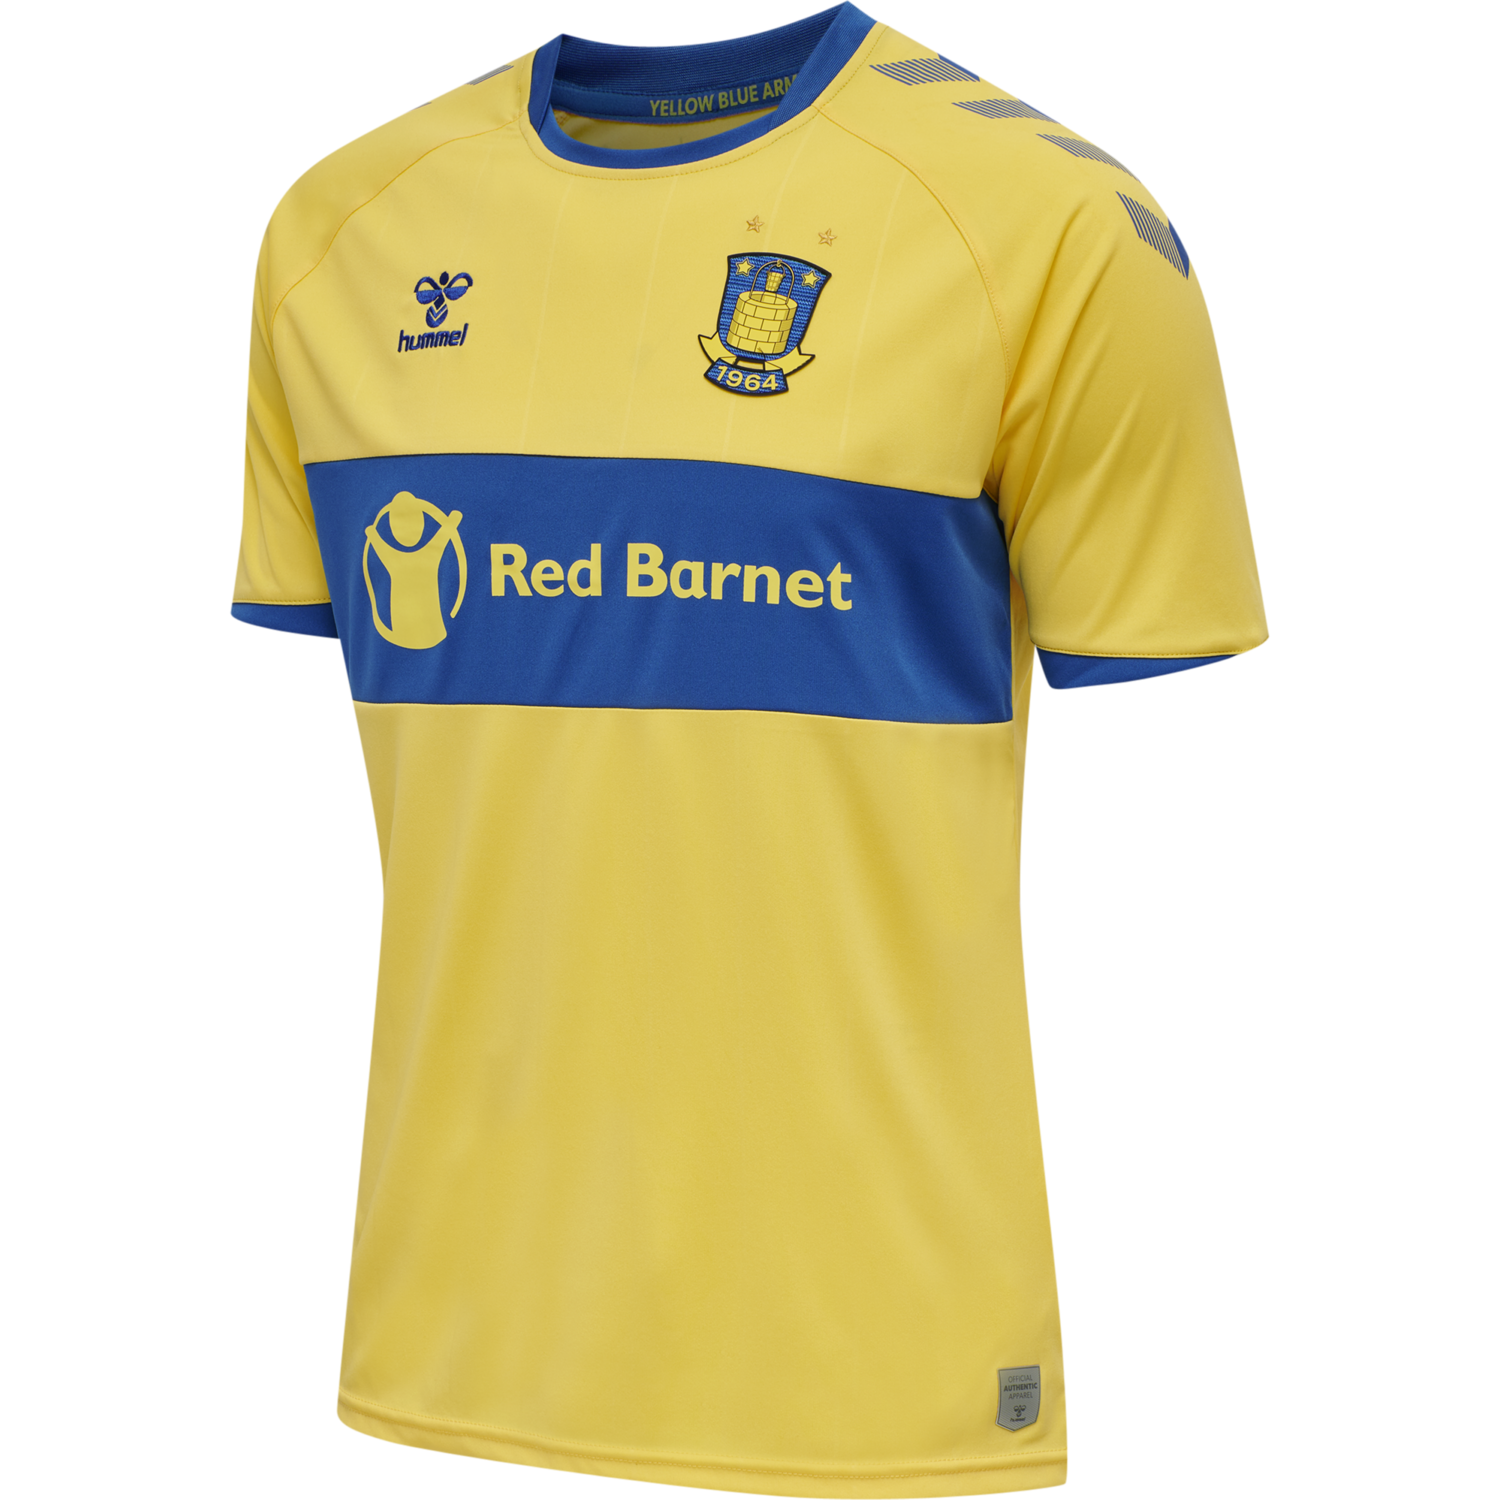 yellow and blue jersey